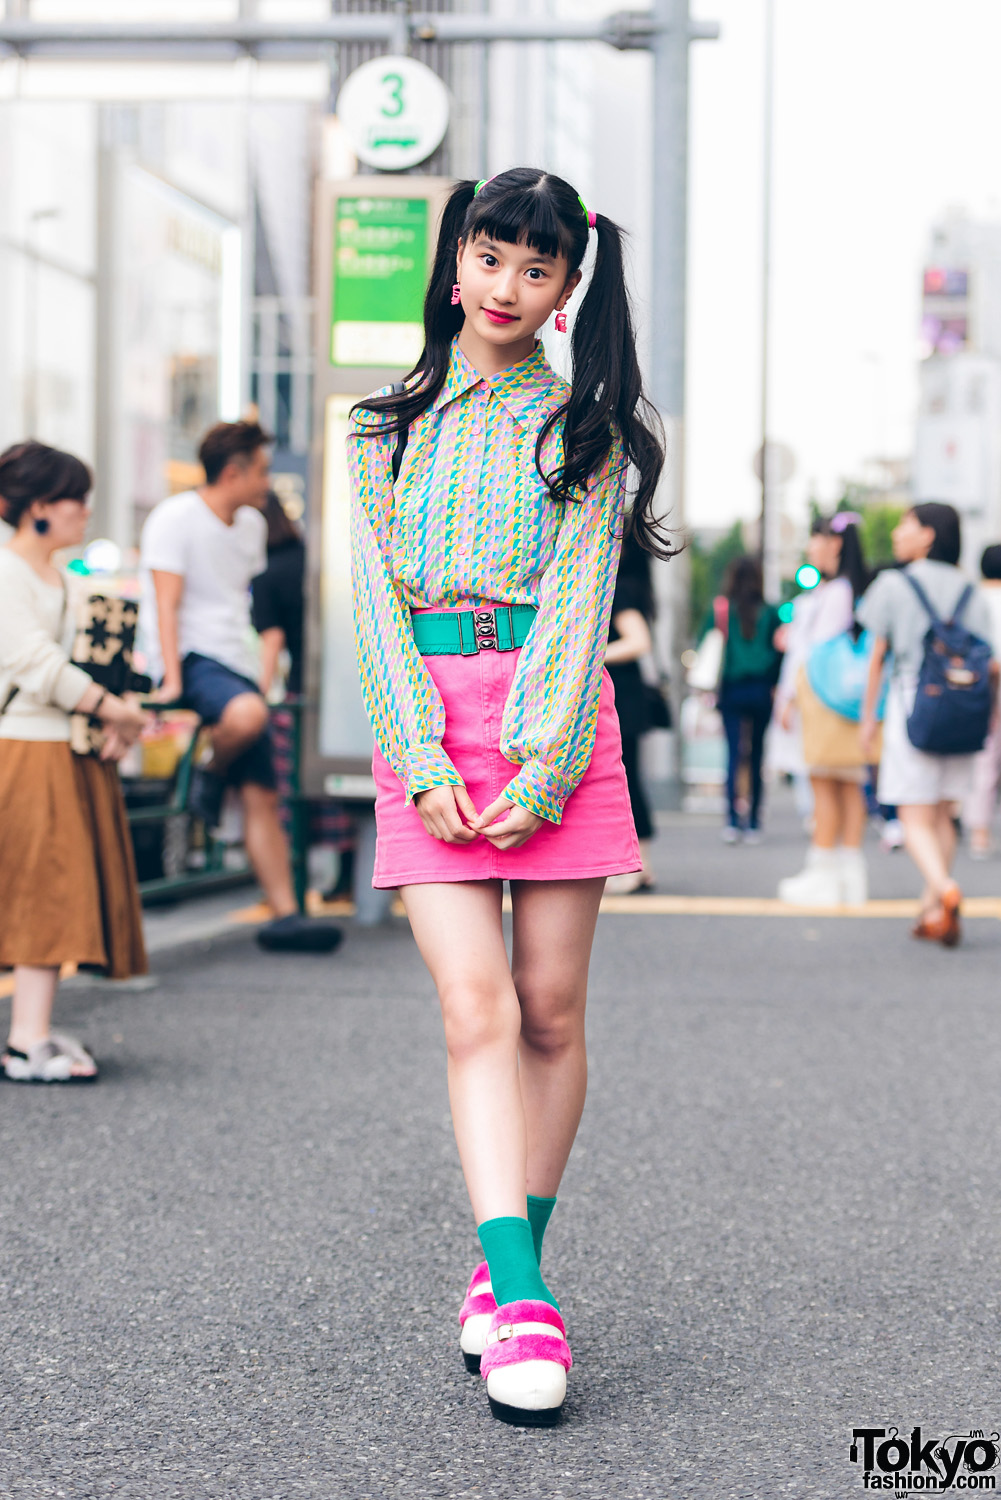 Japanese Model & Actress in Colorful Street Style w/ Vintage Denim Skirt, Hand-Me-Down Quilted Backpack & G2? Ruffle Belt